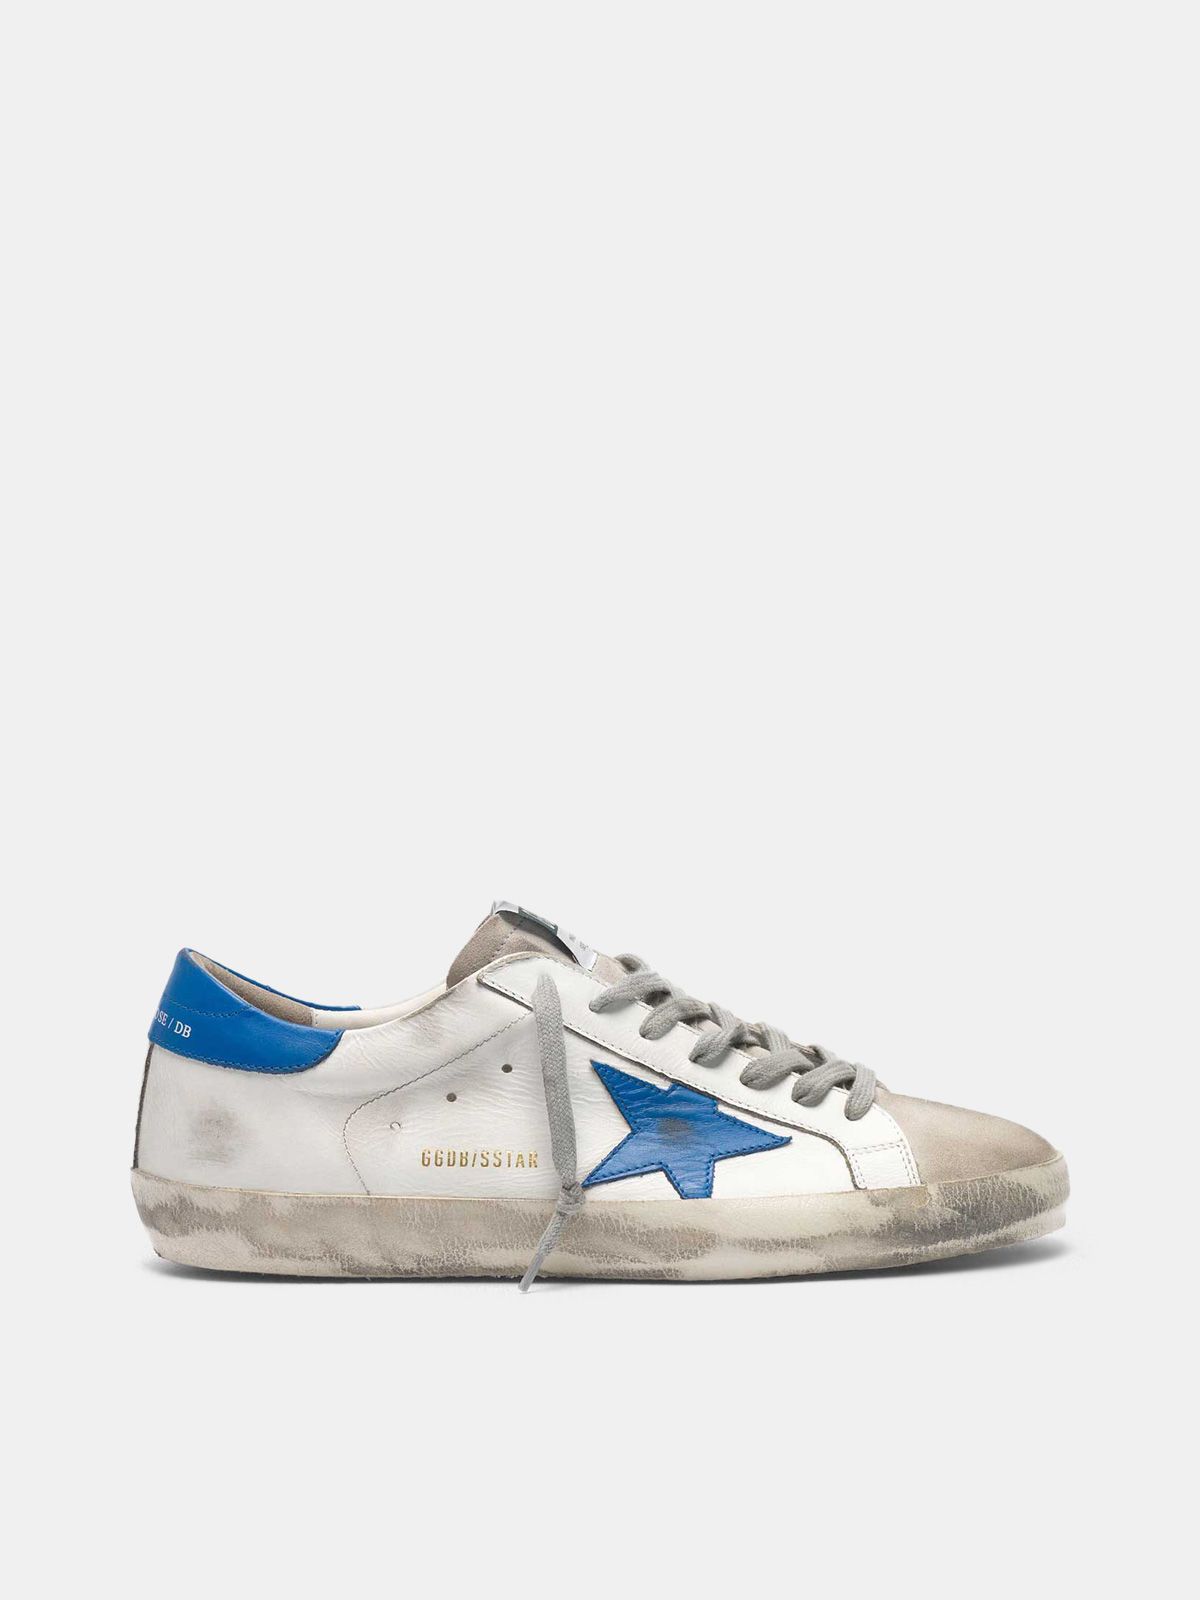 leather and blue star suede | Golden Goose